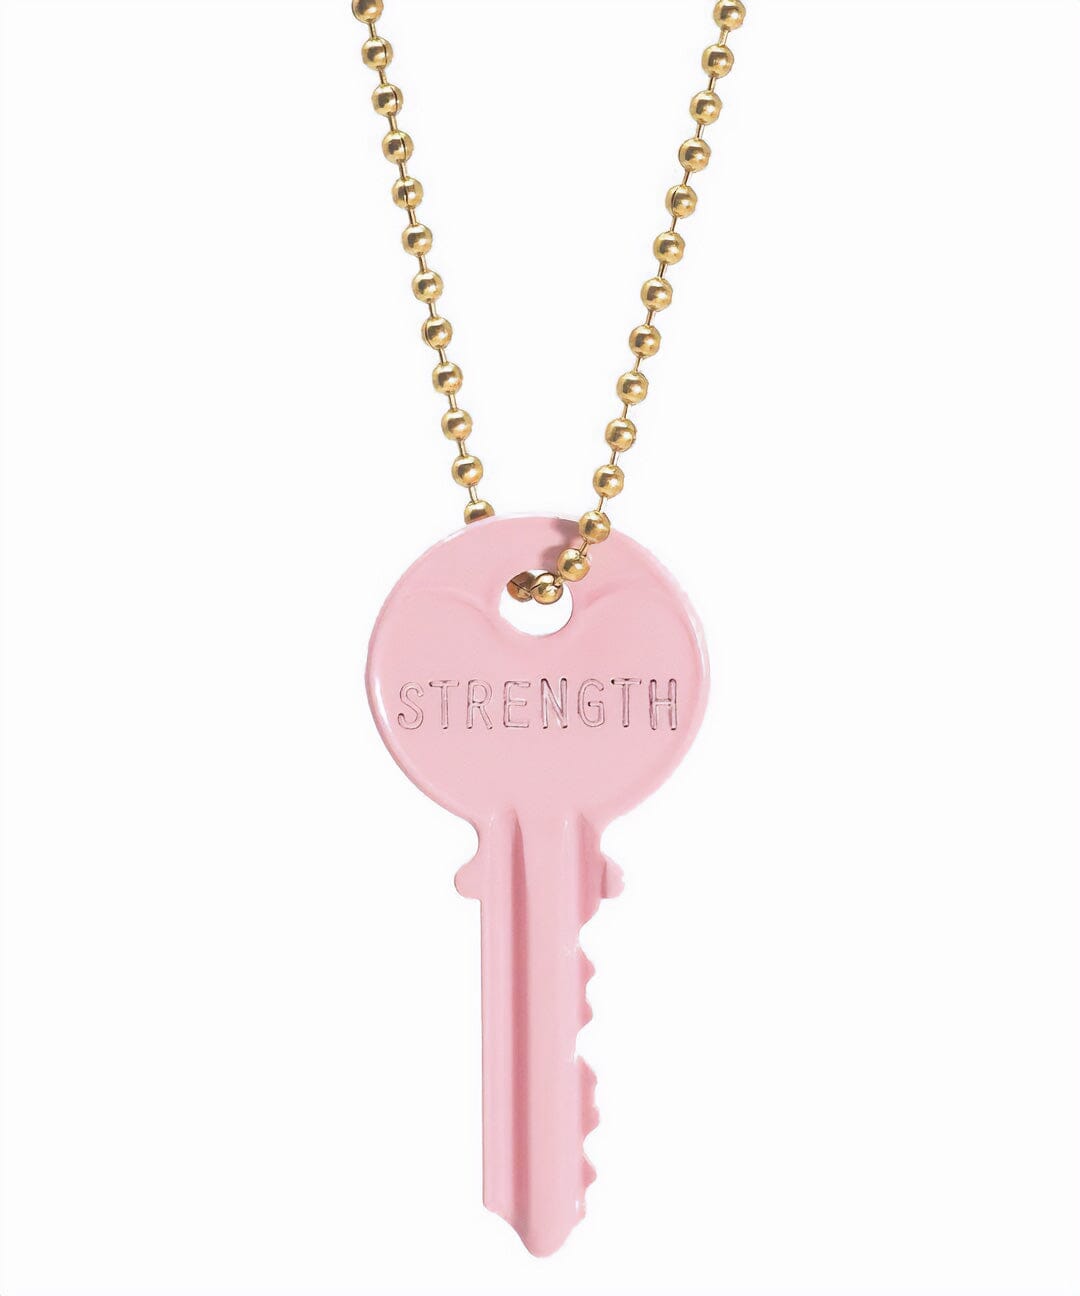 N - Pastel Pink Classic Ball Chain Key Necklace Necklaces The Giving Keys 